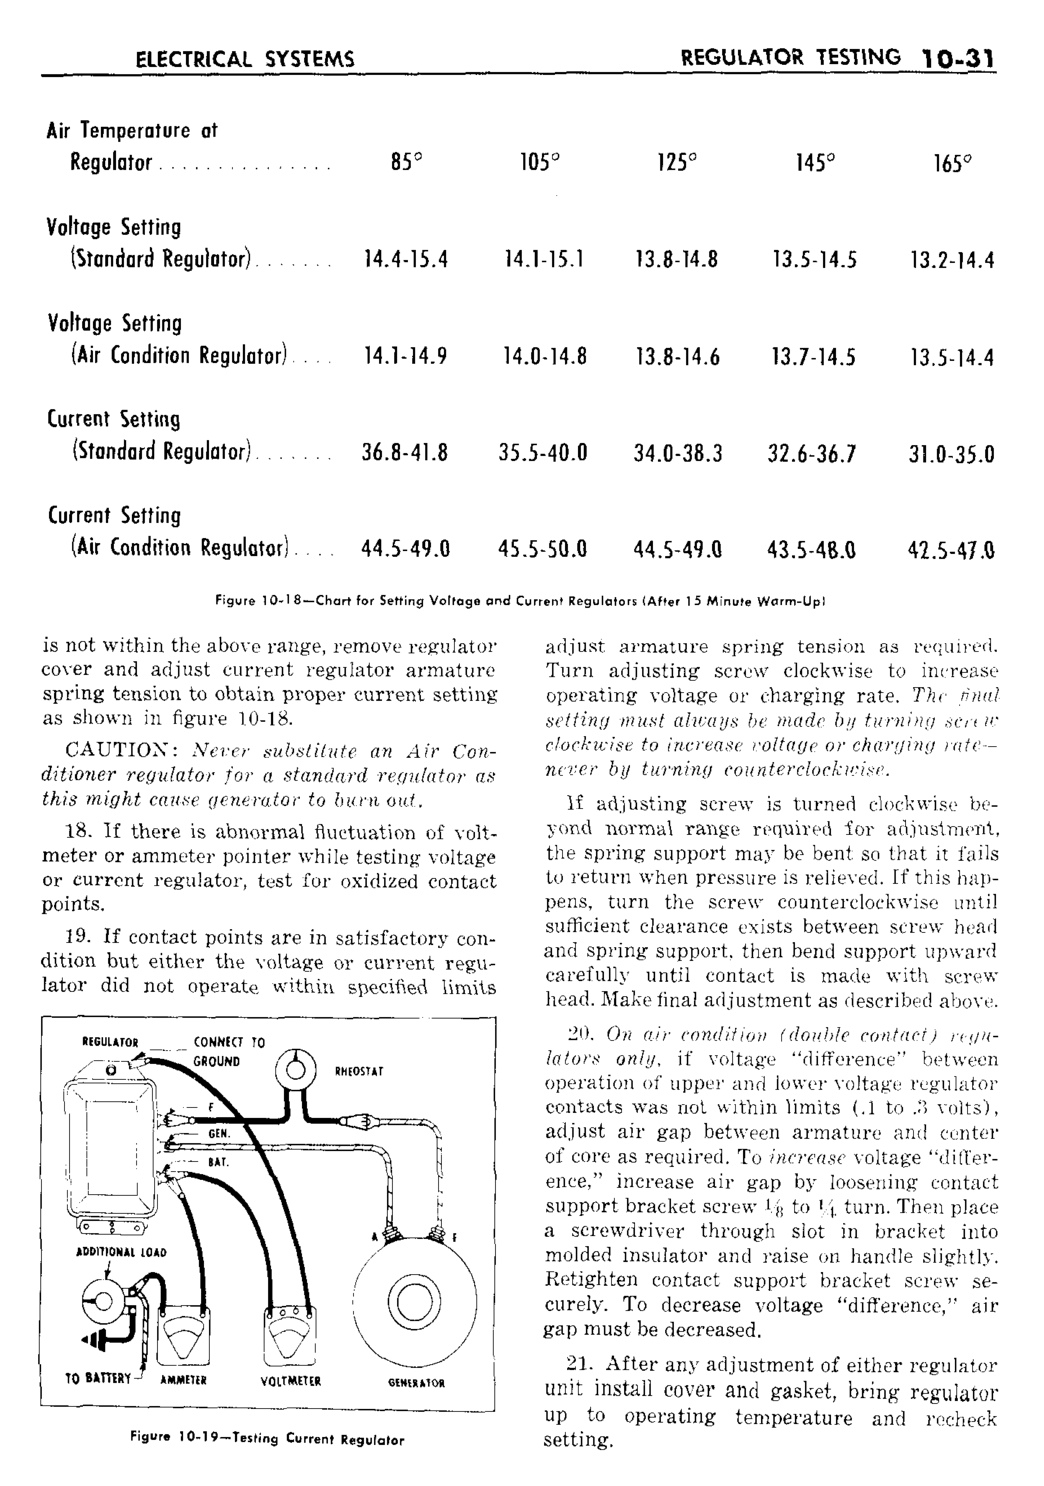 n_11 1959 Buick Shop Manual - Electrical Systems-031-031.jpg